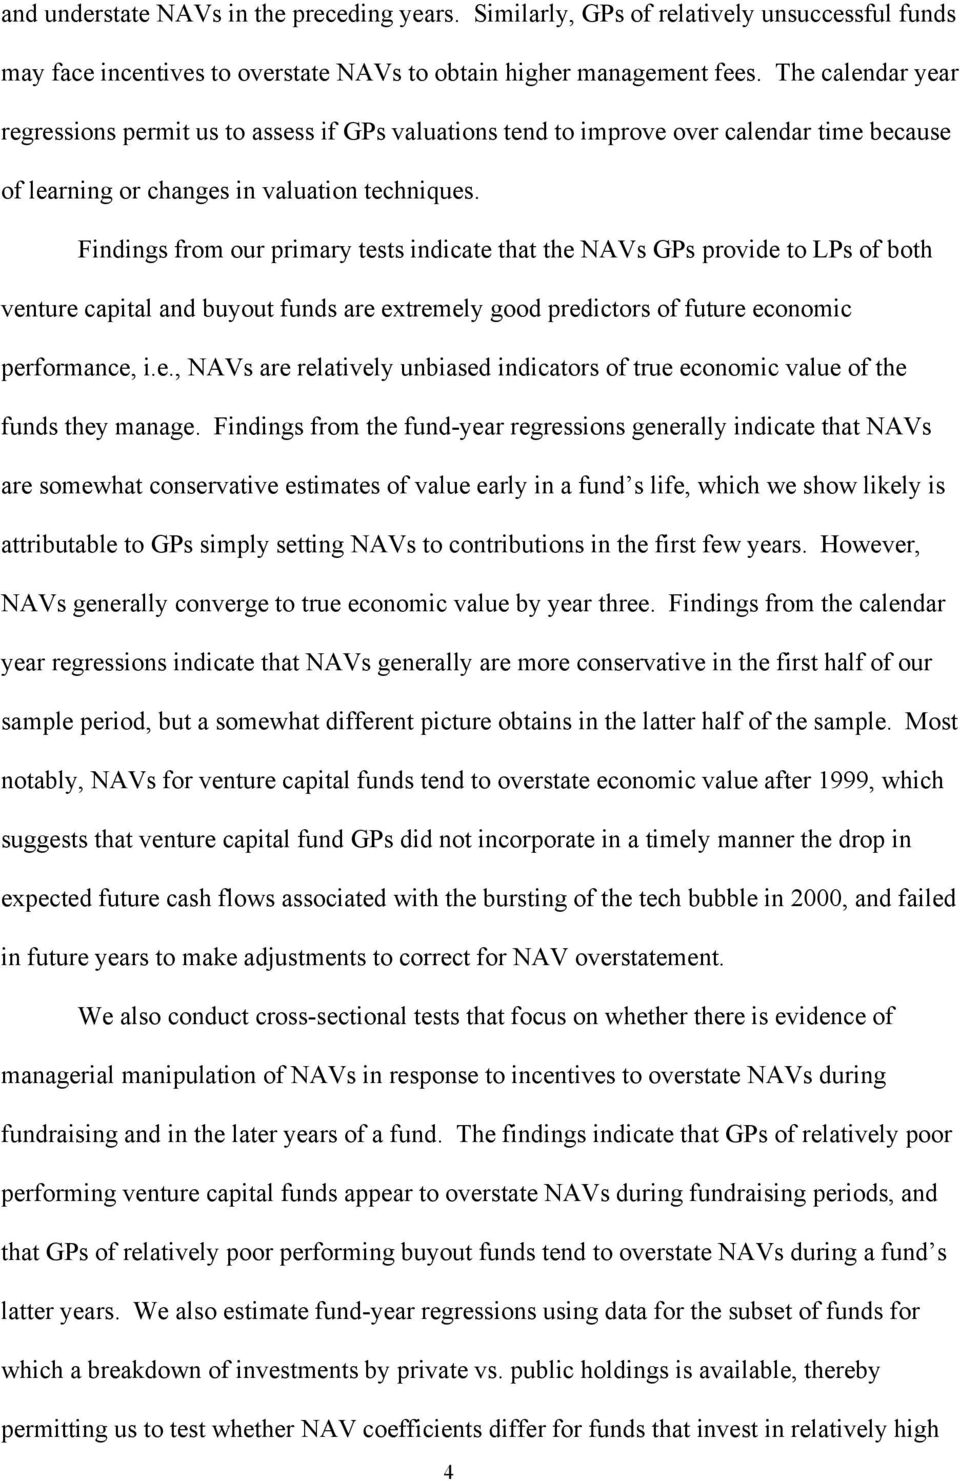 Findings from our primary tests indicate that the NAVs GPs provide to LPs of both venture capital and buyout funds are extremely good predictors of future economic performance, i.e., NAVs are relatively unbiased indicators of true economic value of the funds they manage.